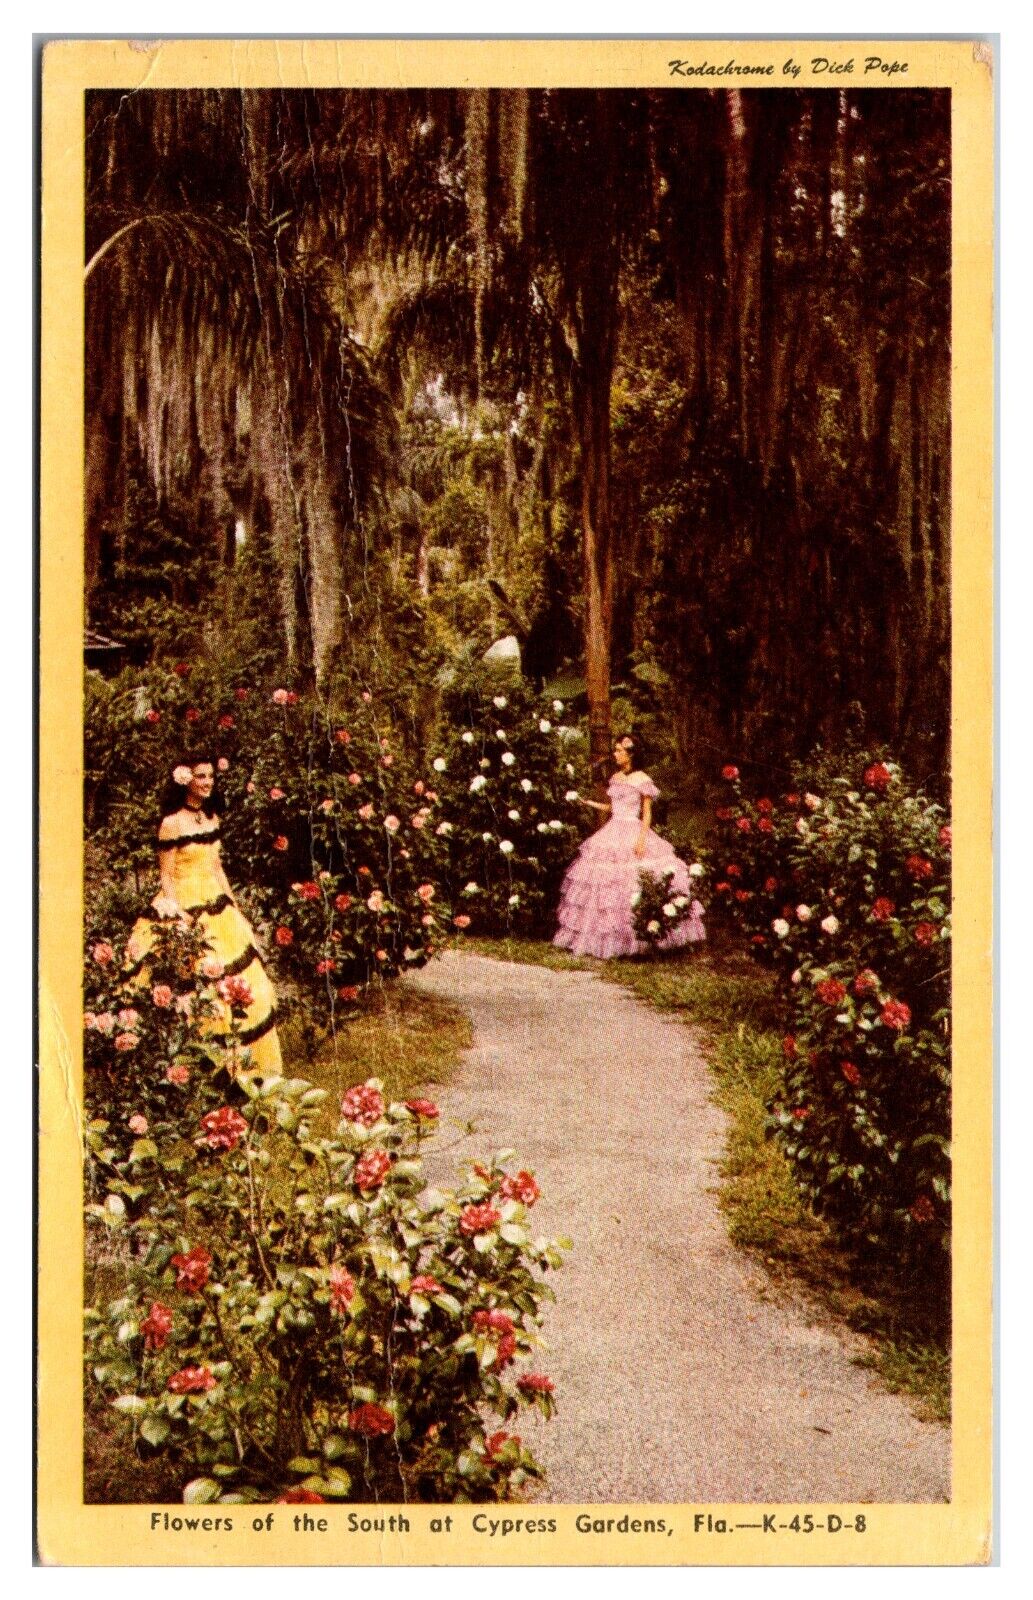 Flowers of the South at Cypress Gardens Florida Kodachrome by Dick Pope Postcard